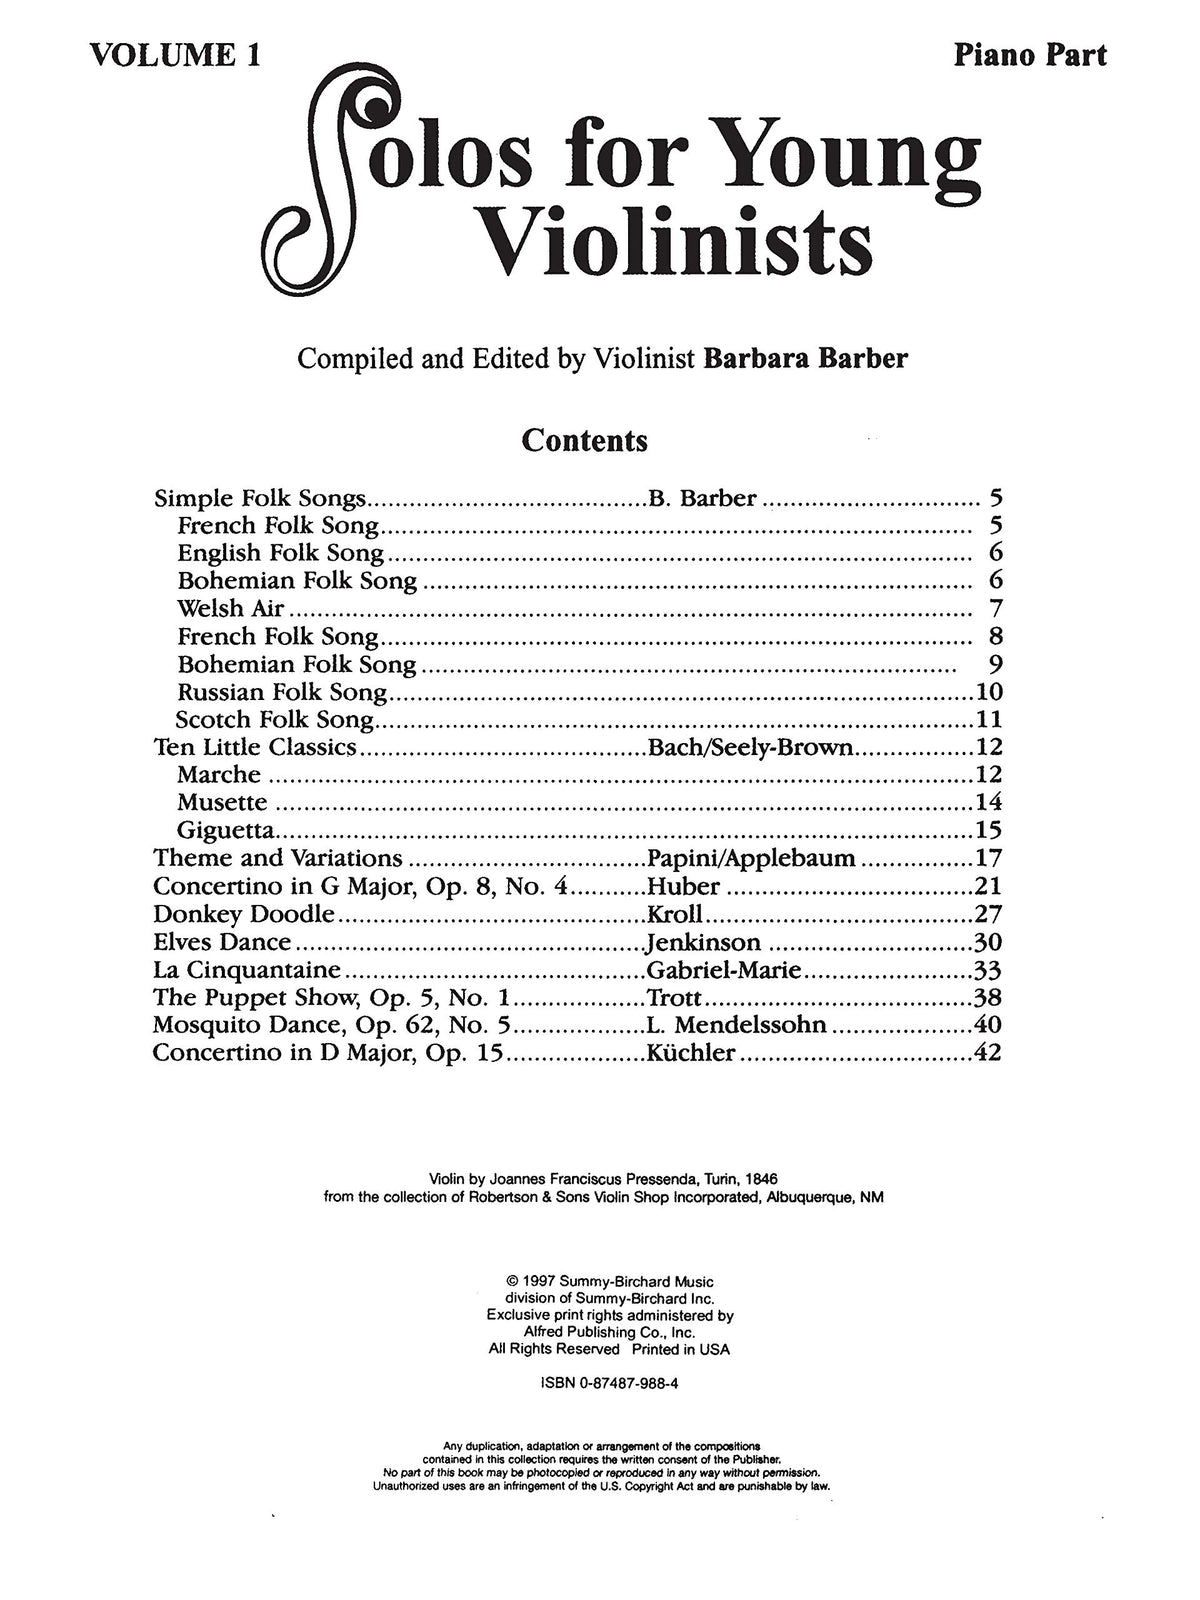 Solos For Young Violinists, Volume 1